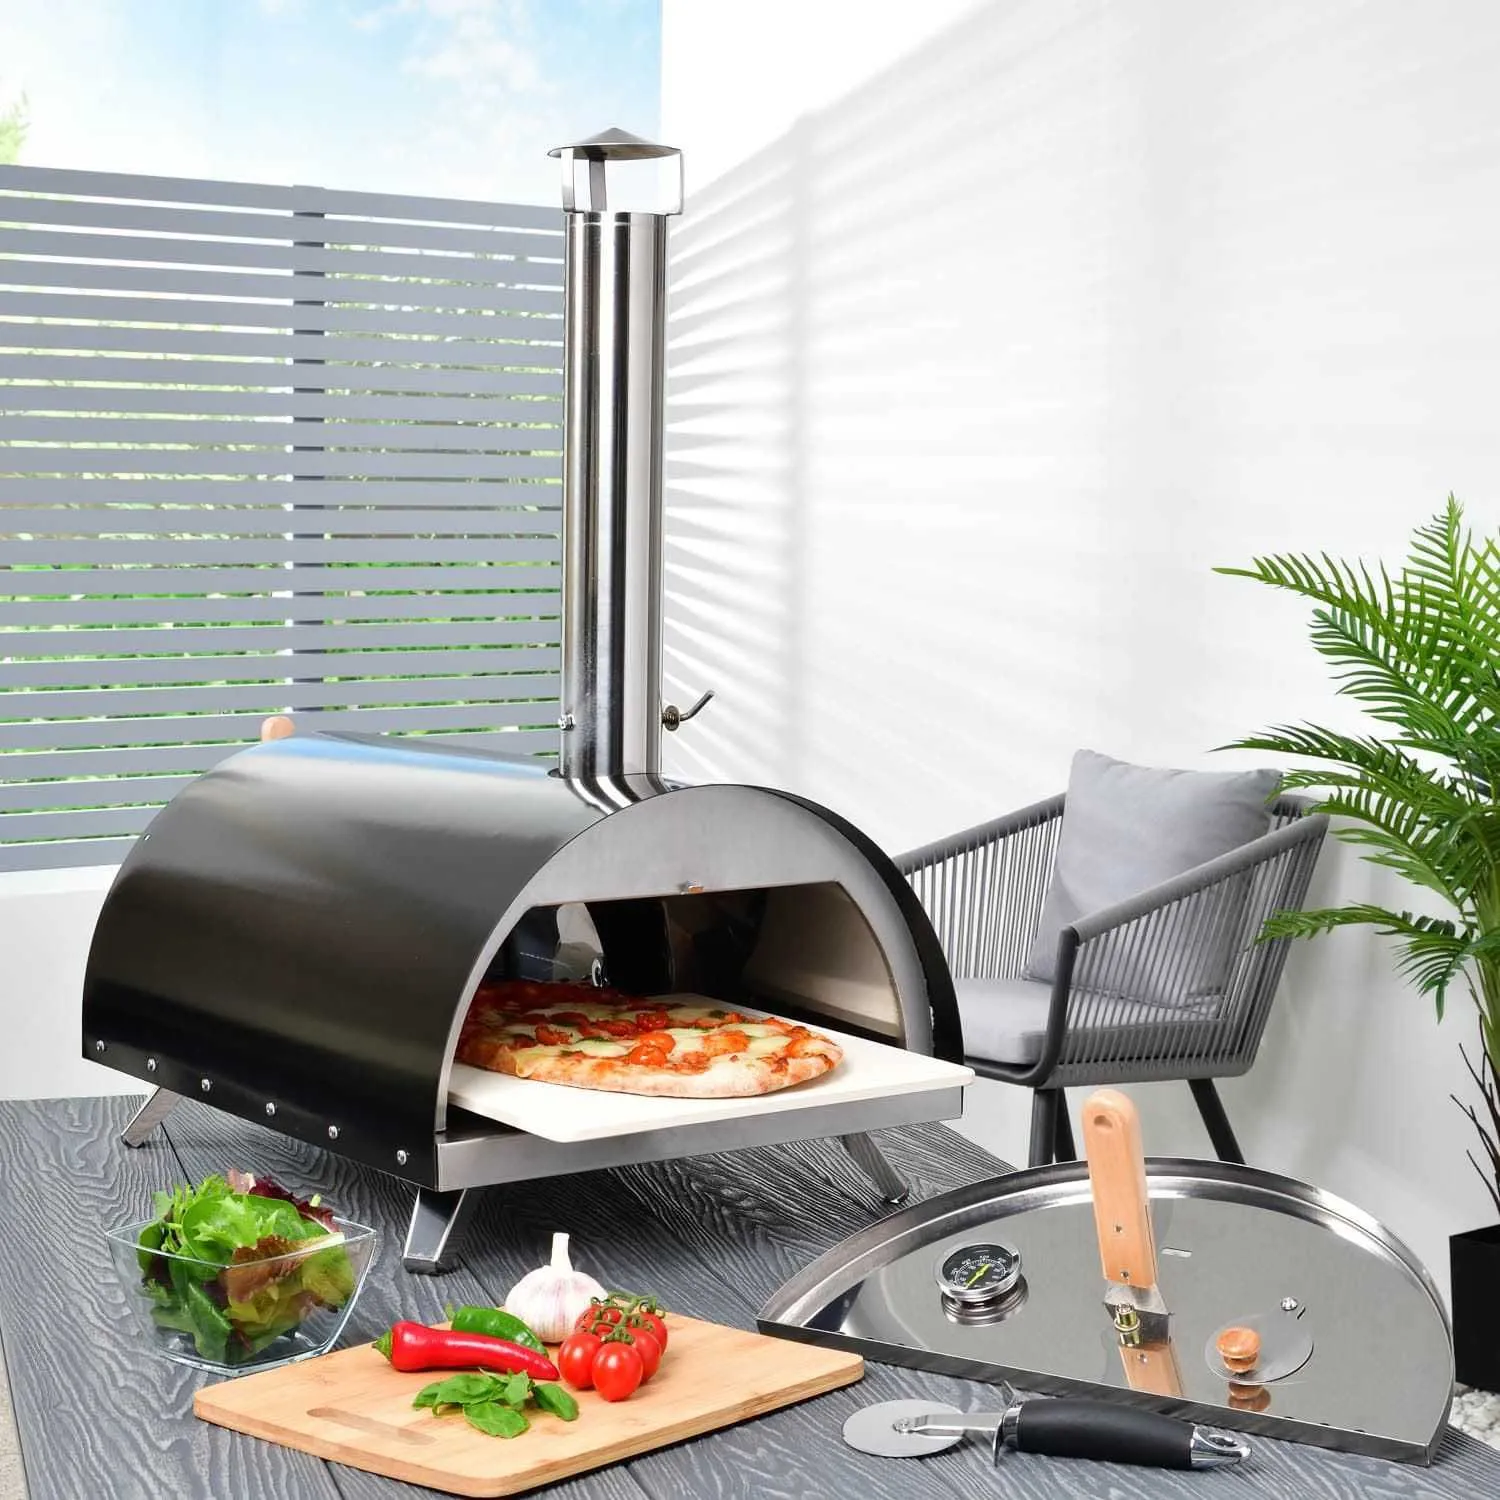 Wood Fired BBQ Pizza Oven